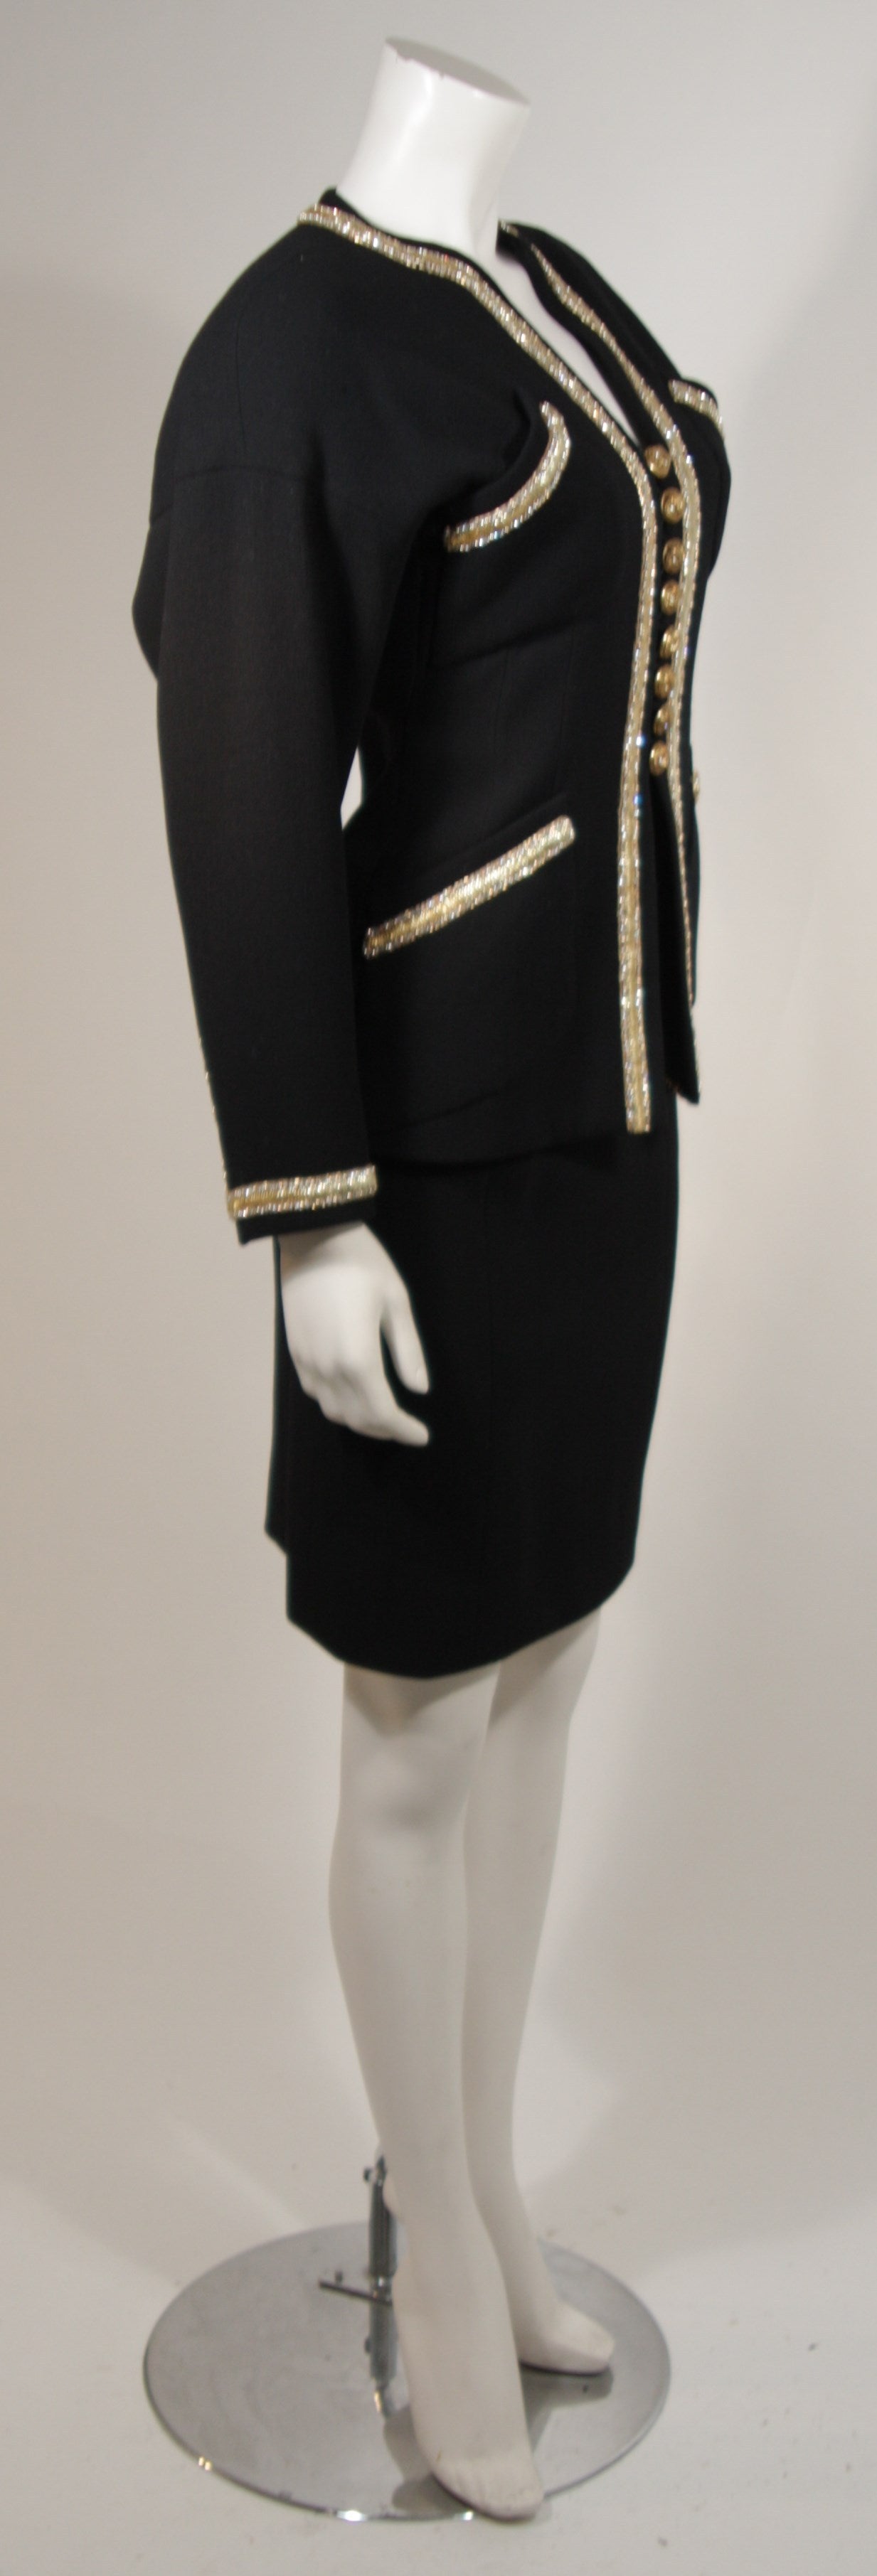 1980's Chanel Haute Couture Black Skirt Suit with Gold Embellished Trim Size 34 1